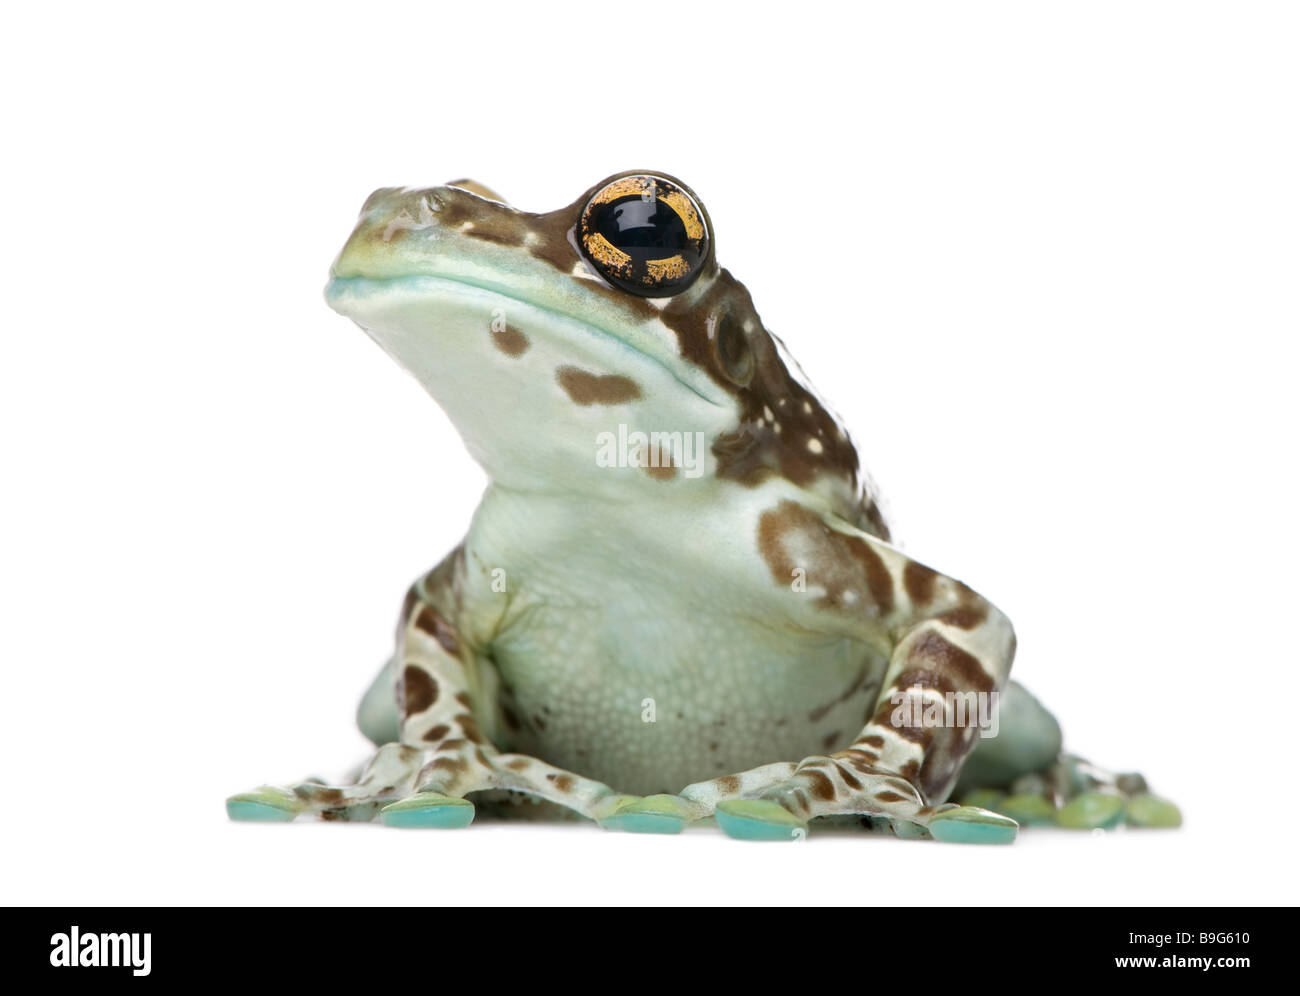 Amazon Milk Frog Trachycephalus resinifictrix in front of a white background Stock Photo